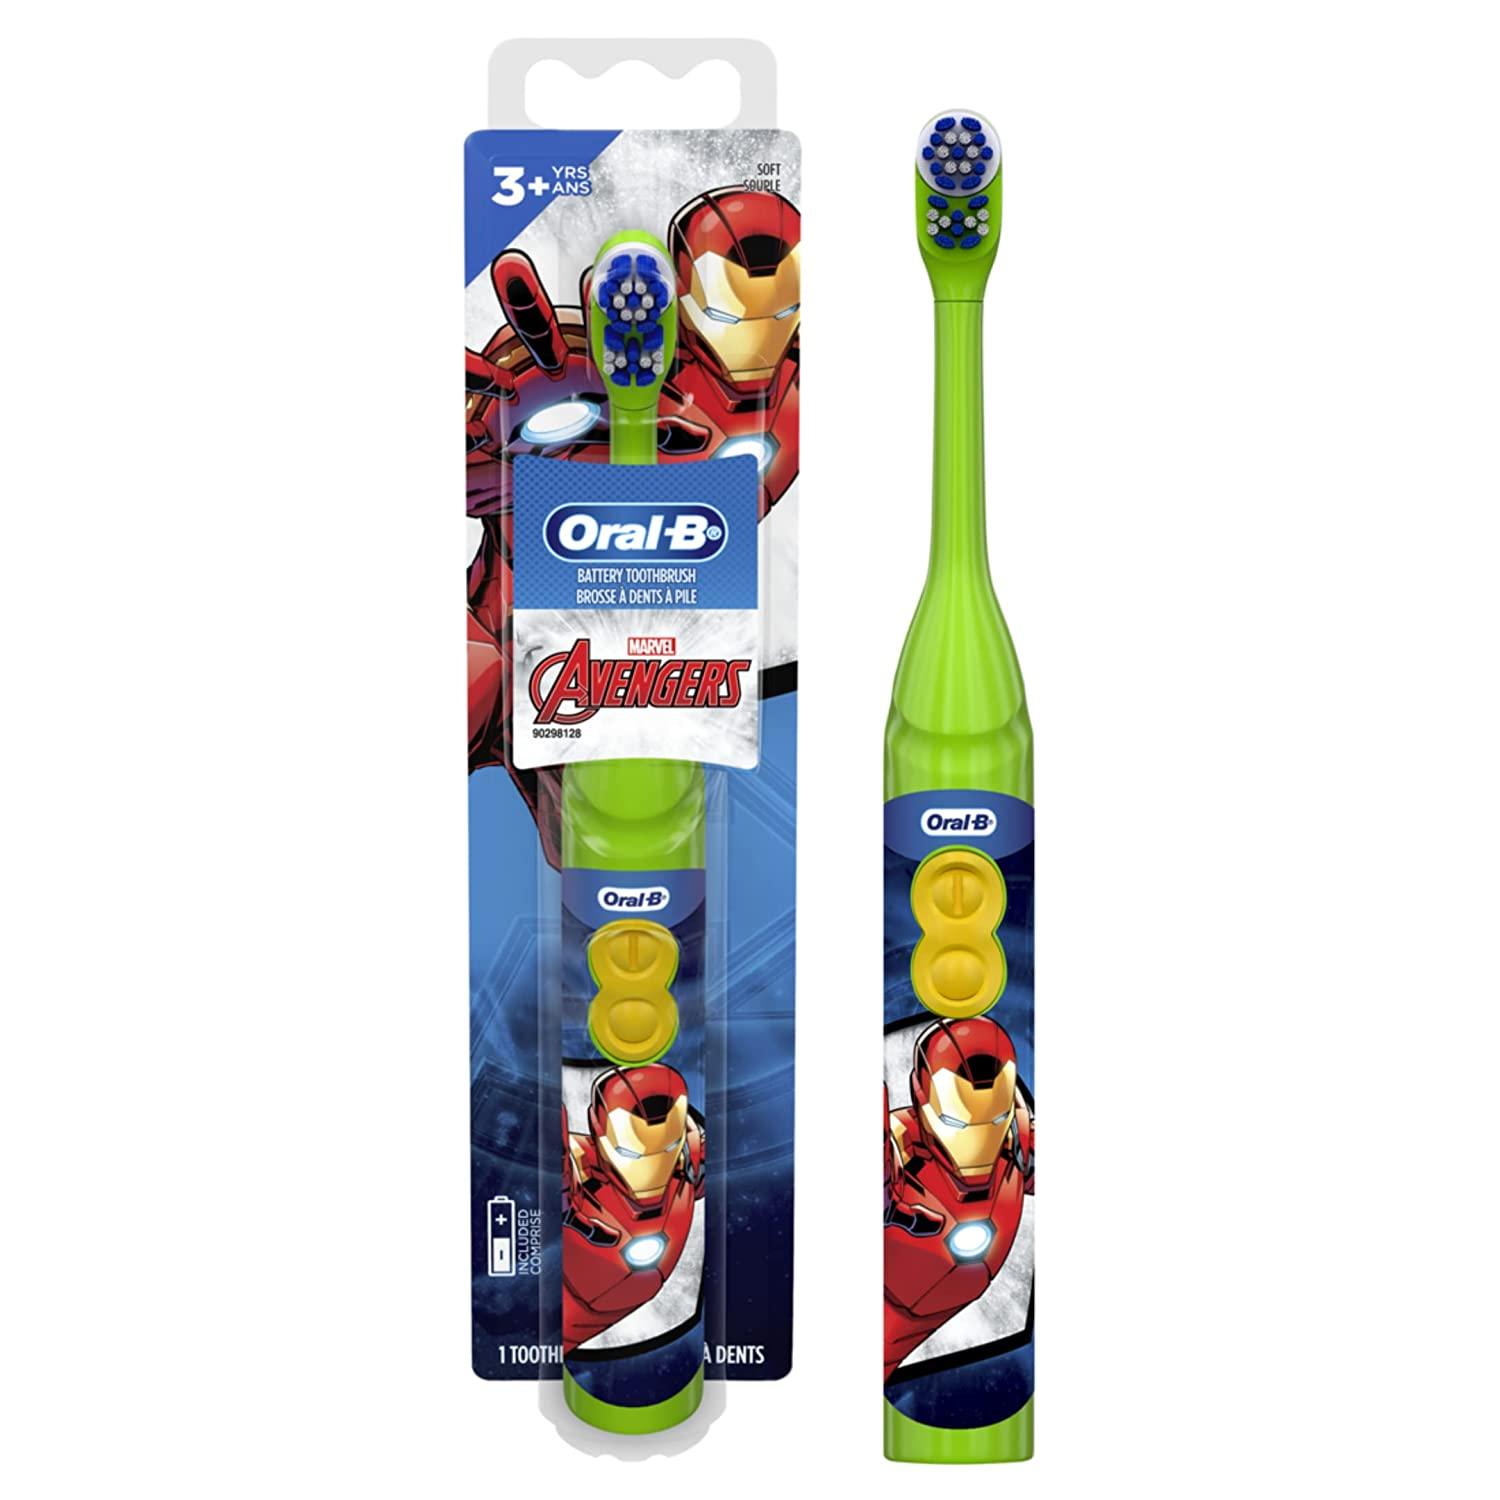 Oral-B Kid's Battery Toothbrush Featuring Marvel's Avengers